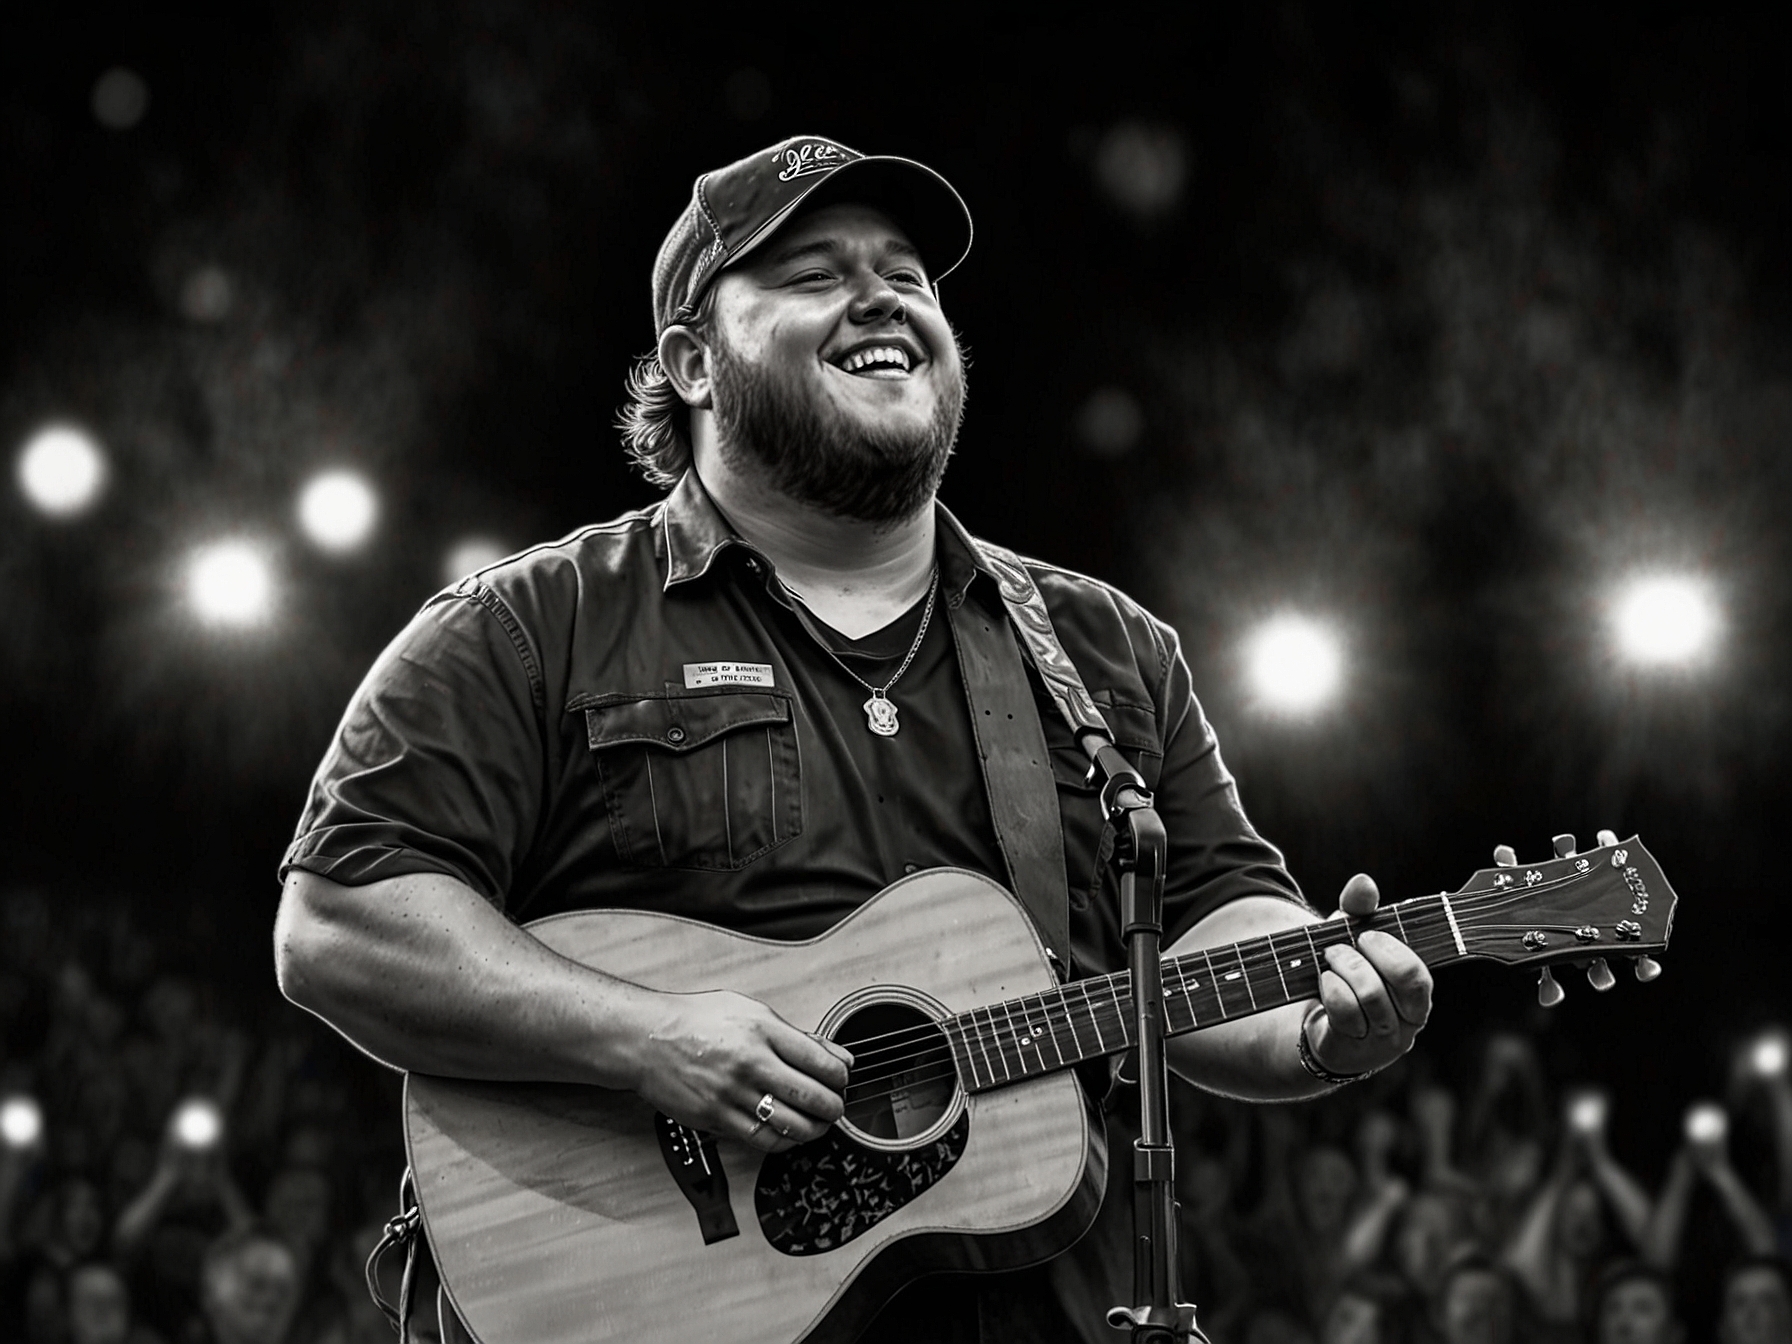 Luke Combs performing on stage, deeply immersed in his music, symbolizing his dedication to his career and the sacrifices made in his personal life.